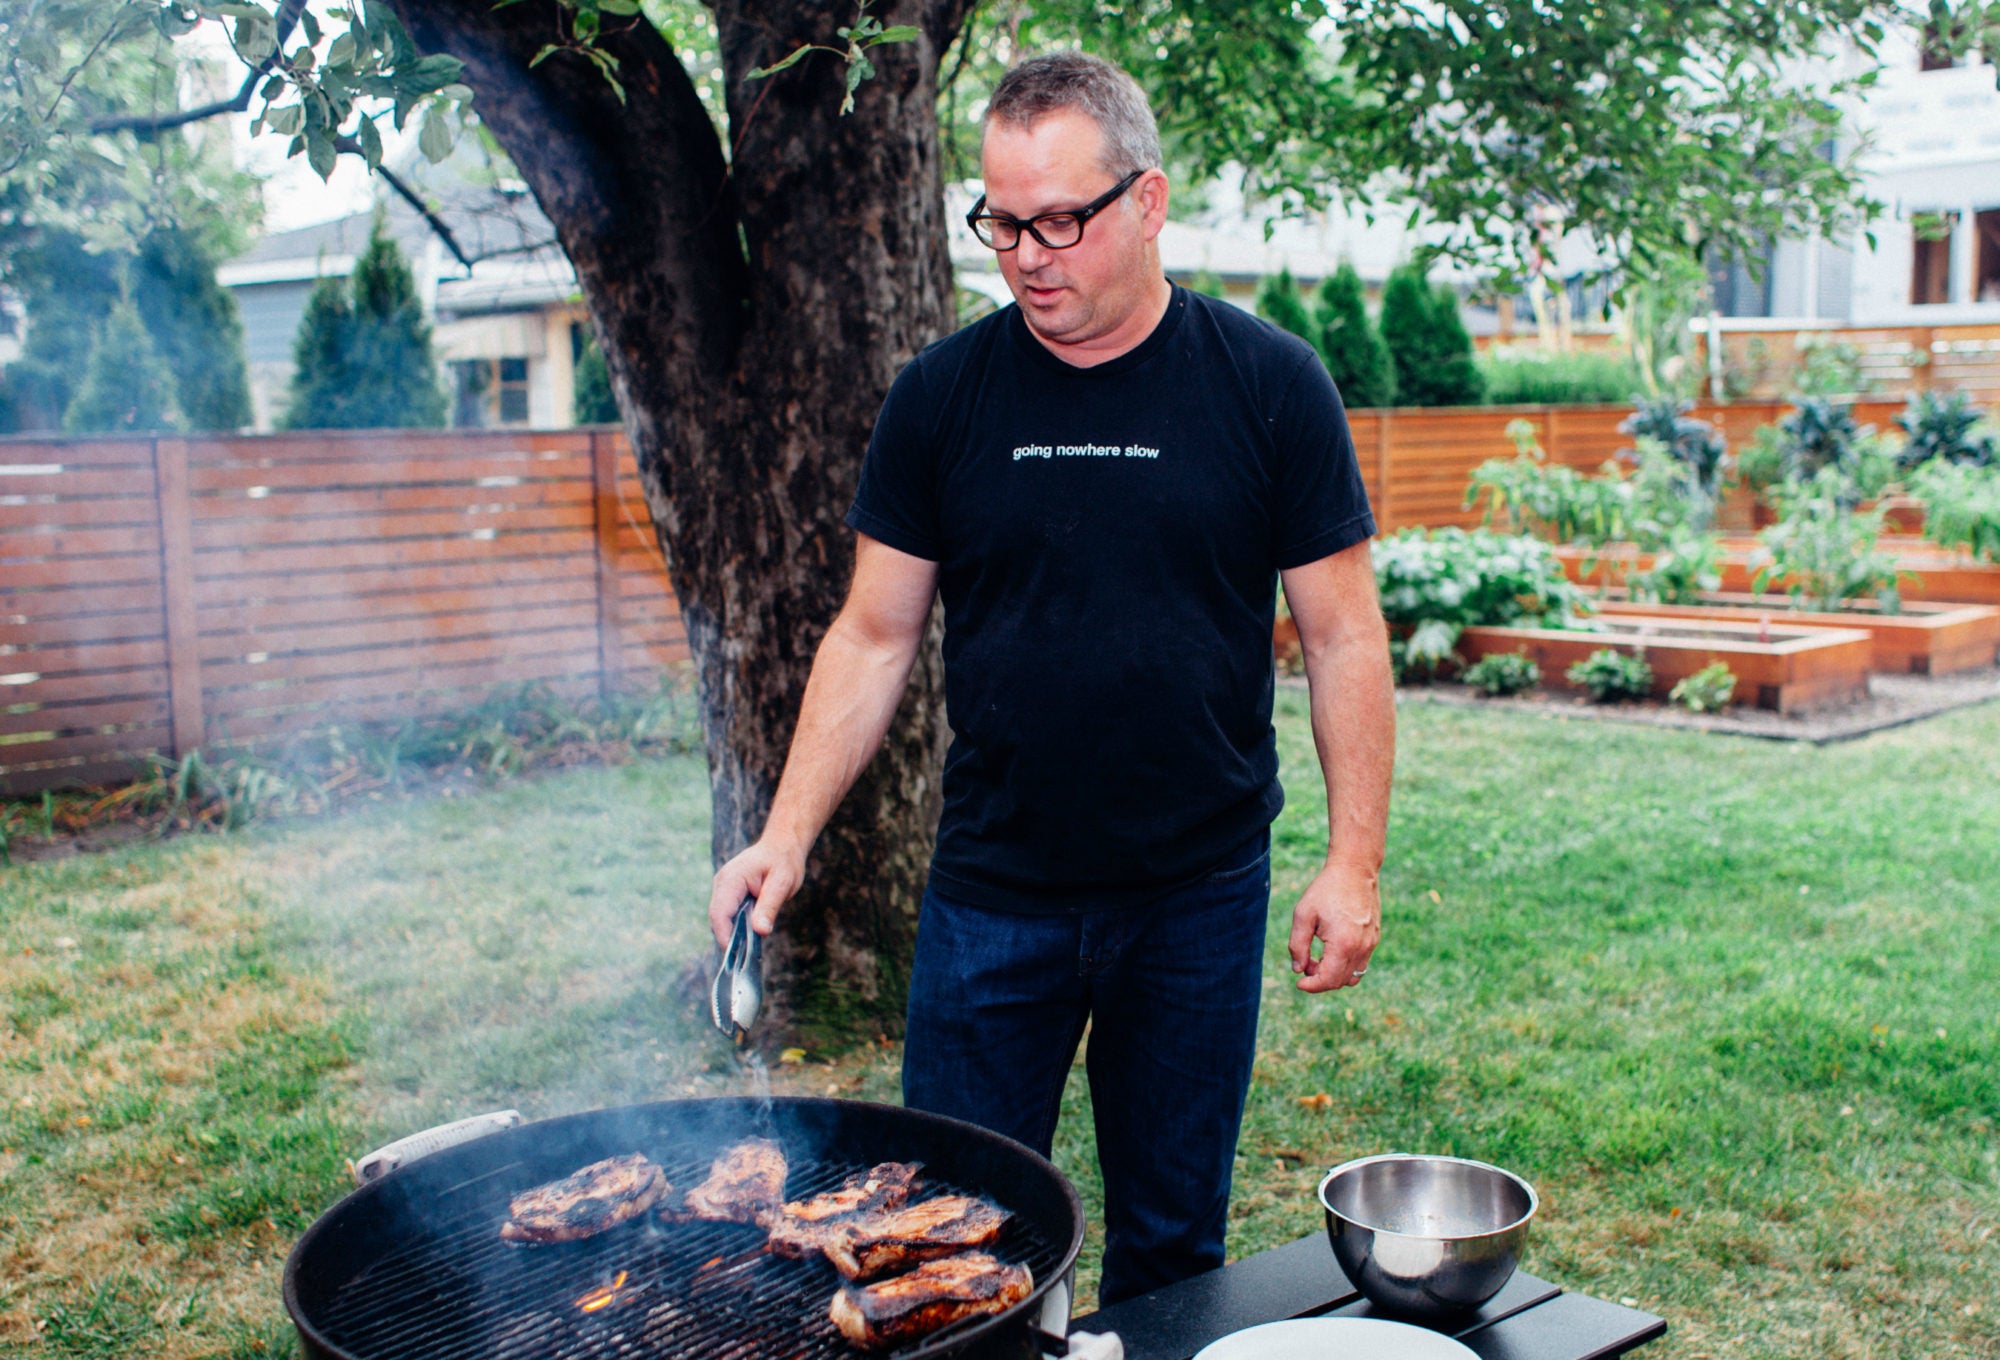 Paul Kahan grills ribs in his backyard in Chicago, IL, October 2, 2017.